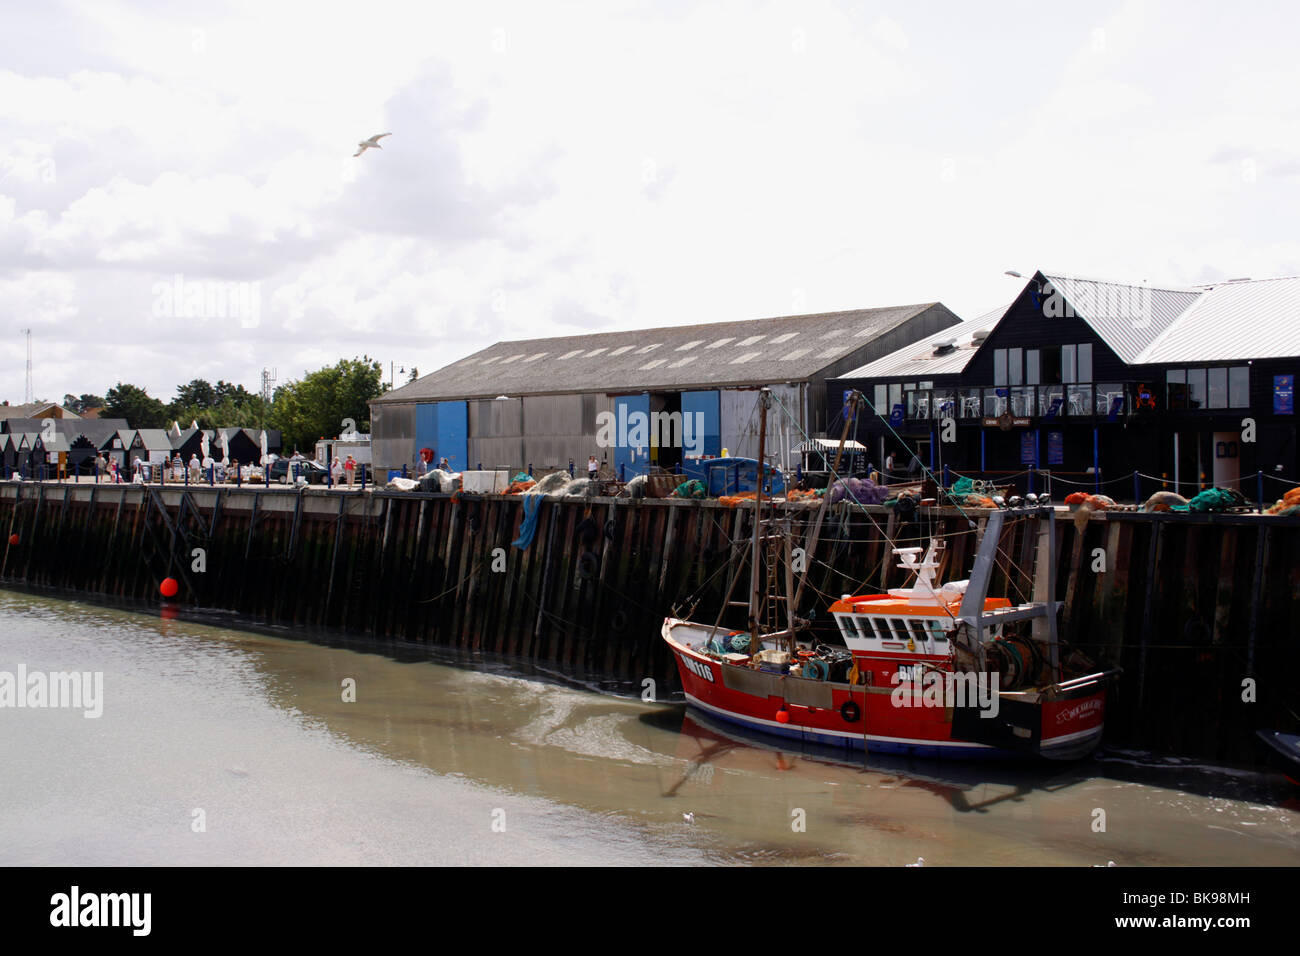 FISHING BOAT MOORED IN WHITSTABLE HARBOUR. KENT UK. Stock Photo